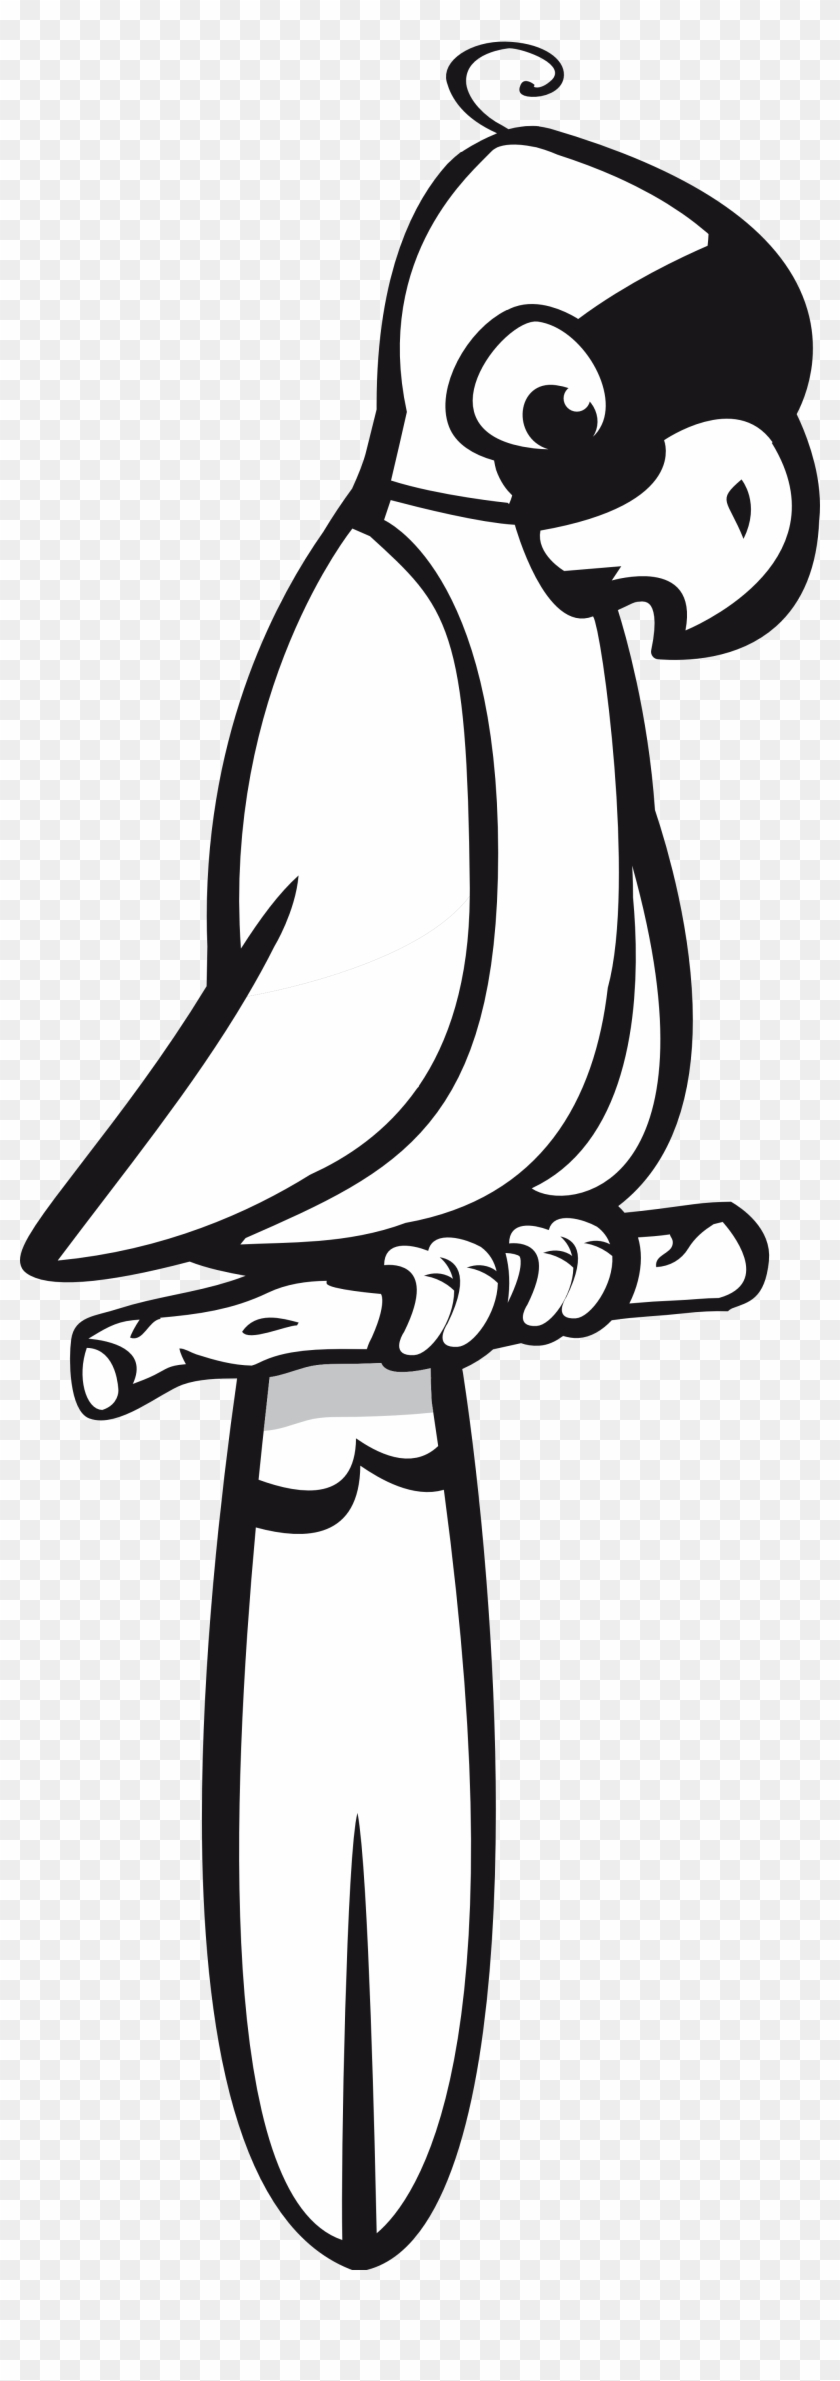 Parrot Clipart Black And White - Parrot Transparent Black And White #69460